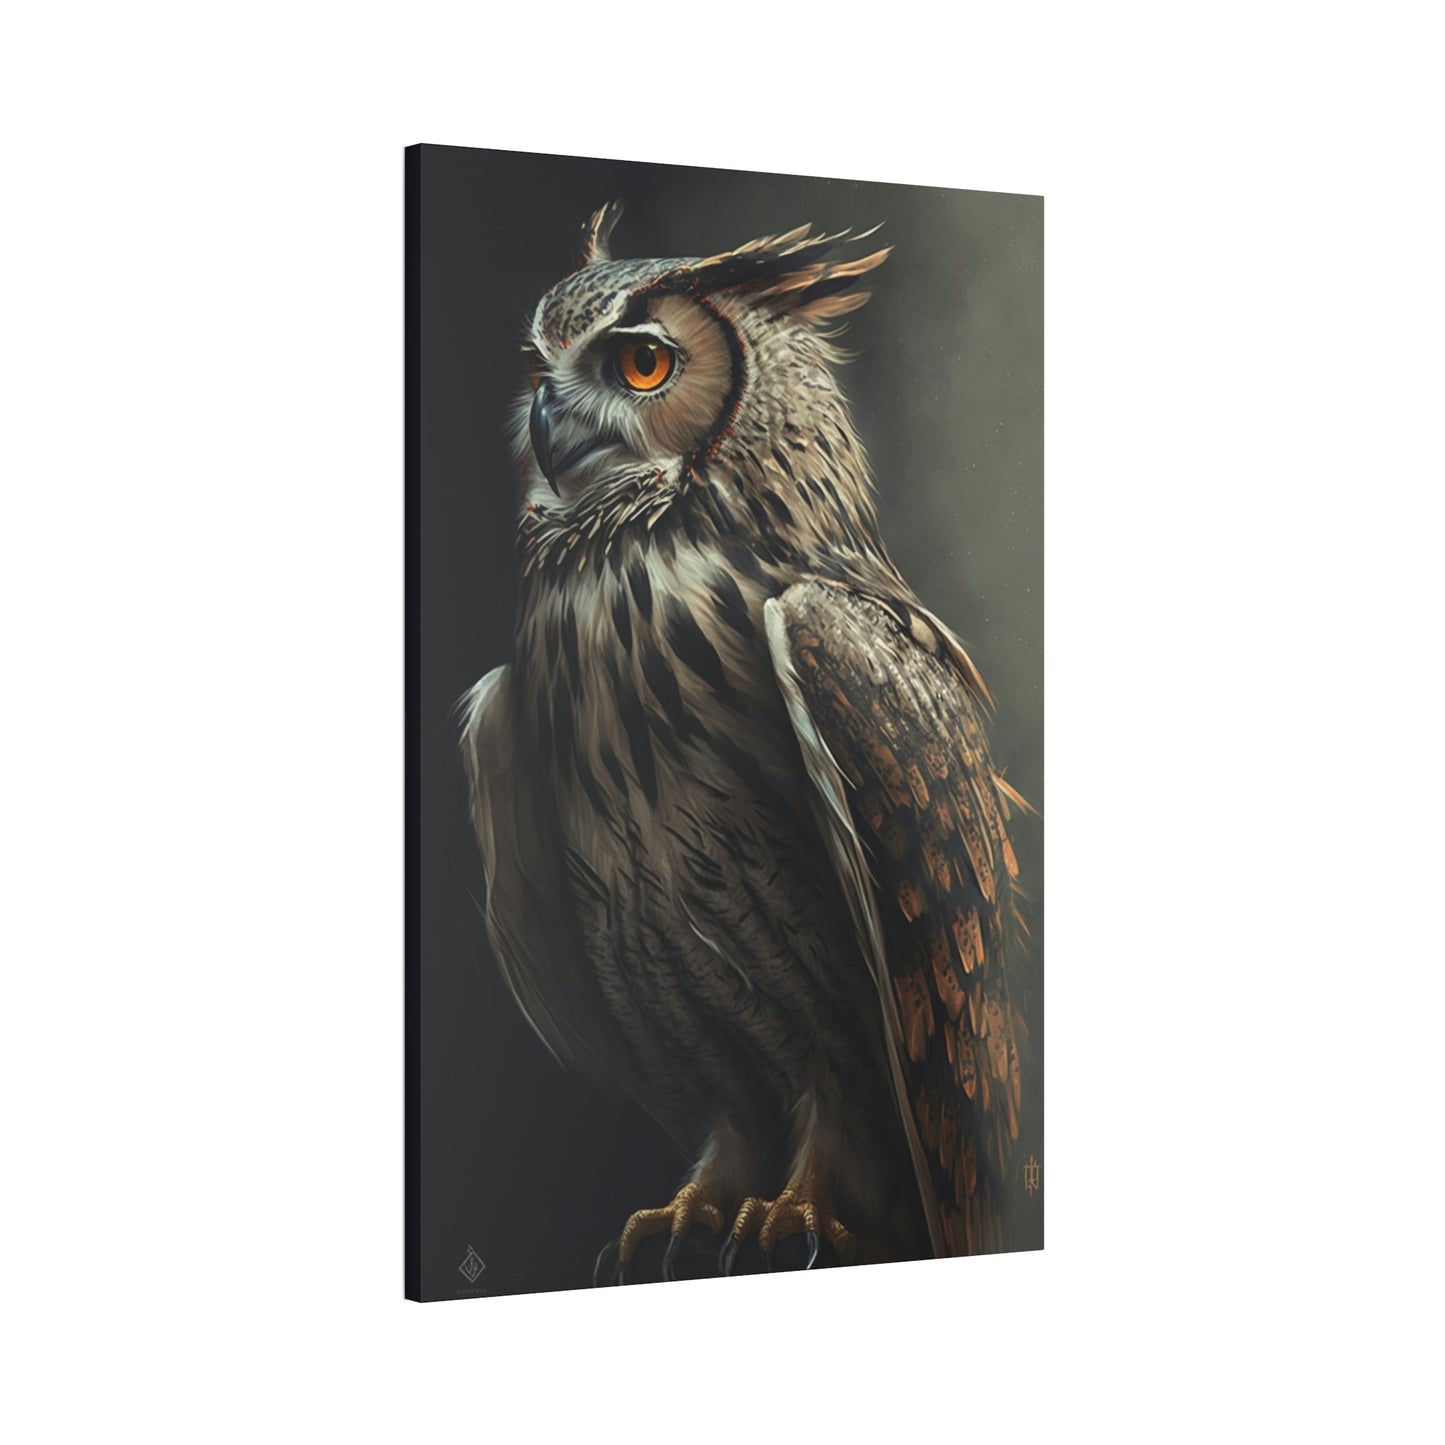 Noble Hunter: An Artistic Depiction of a Single Owl